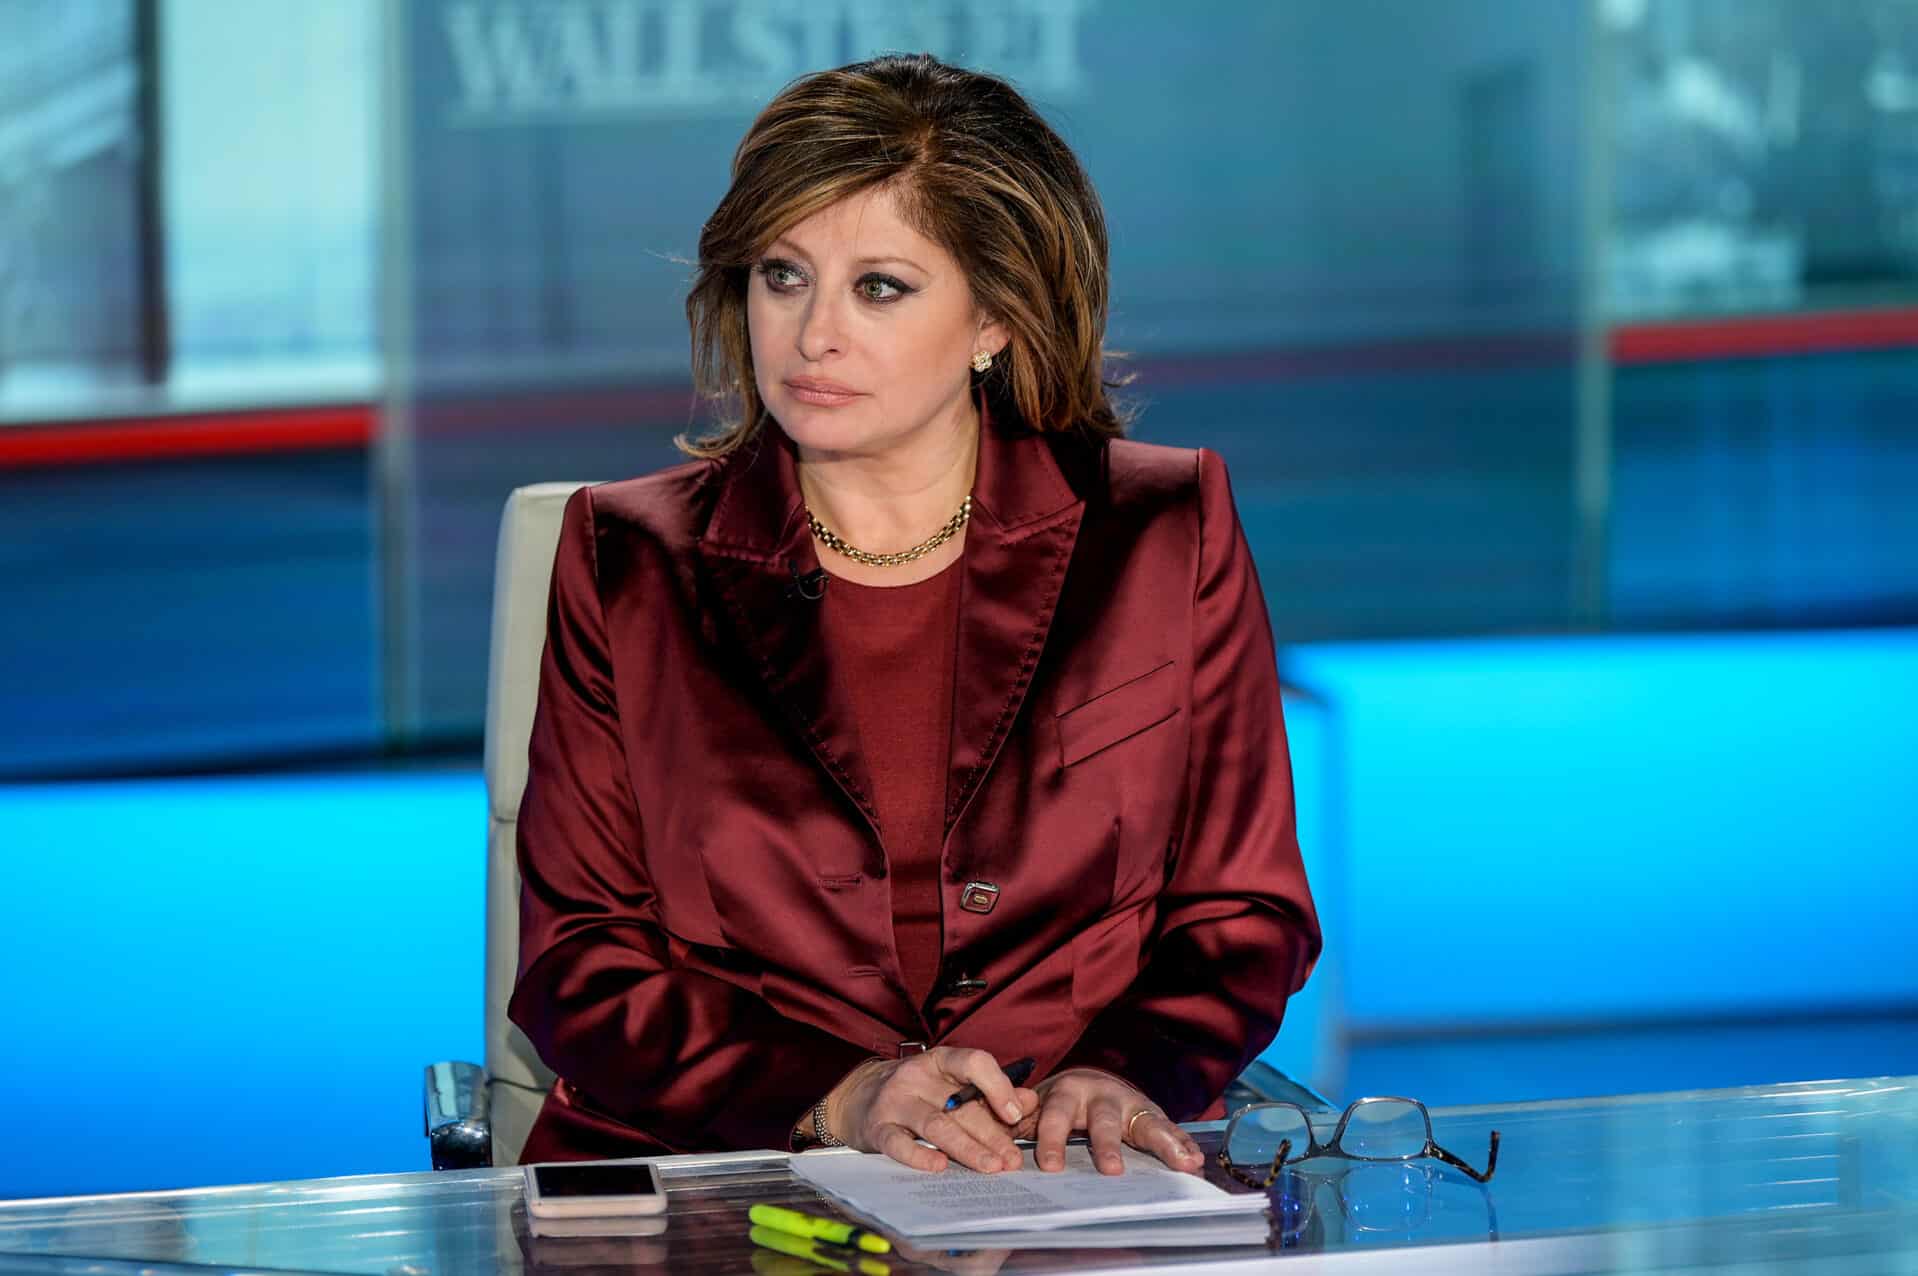 Maria Bartiromo does television news reporting